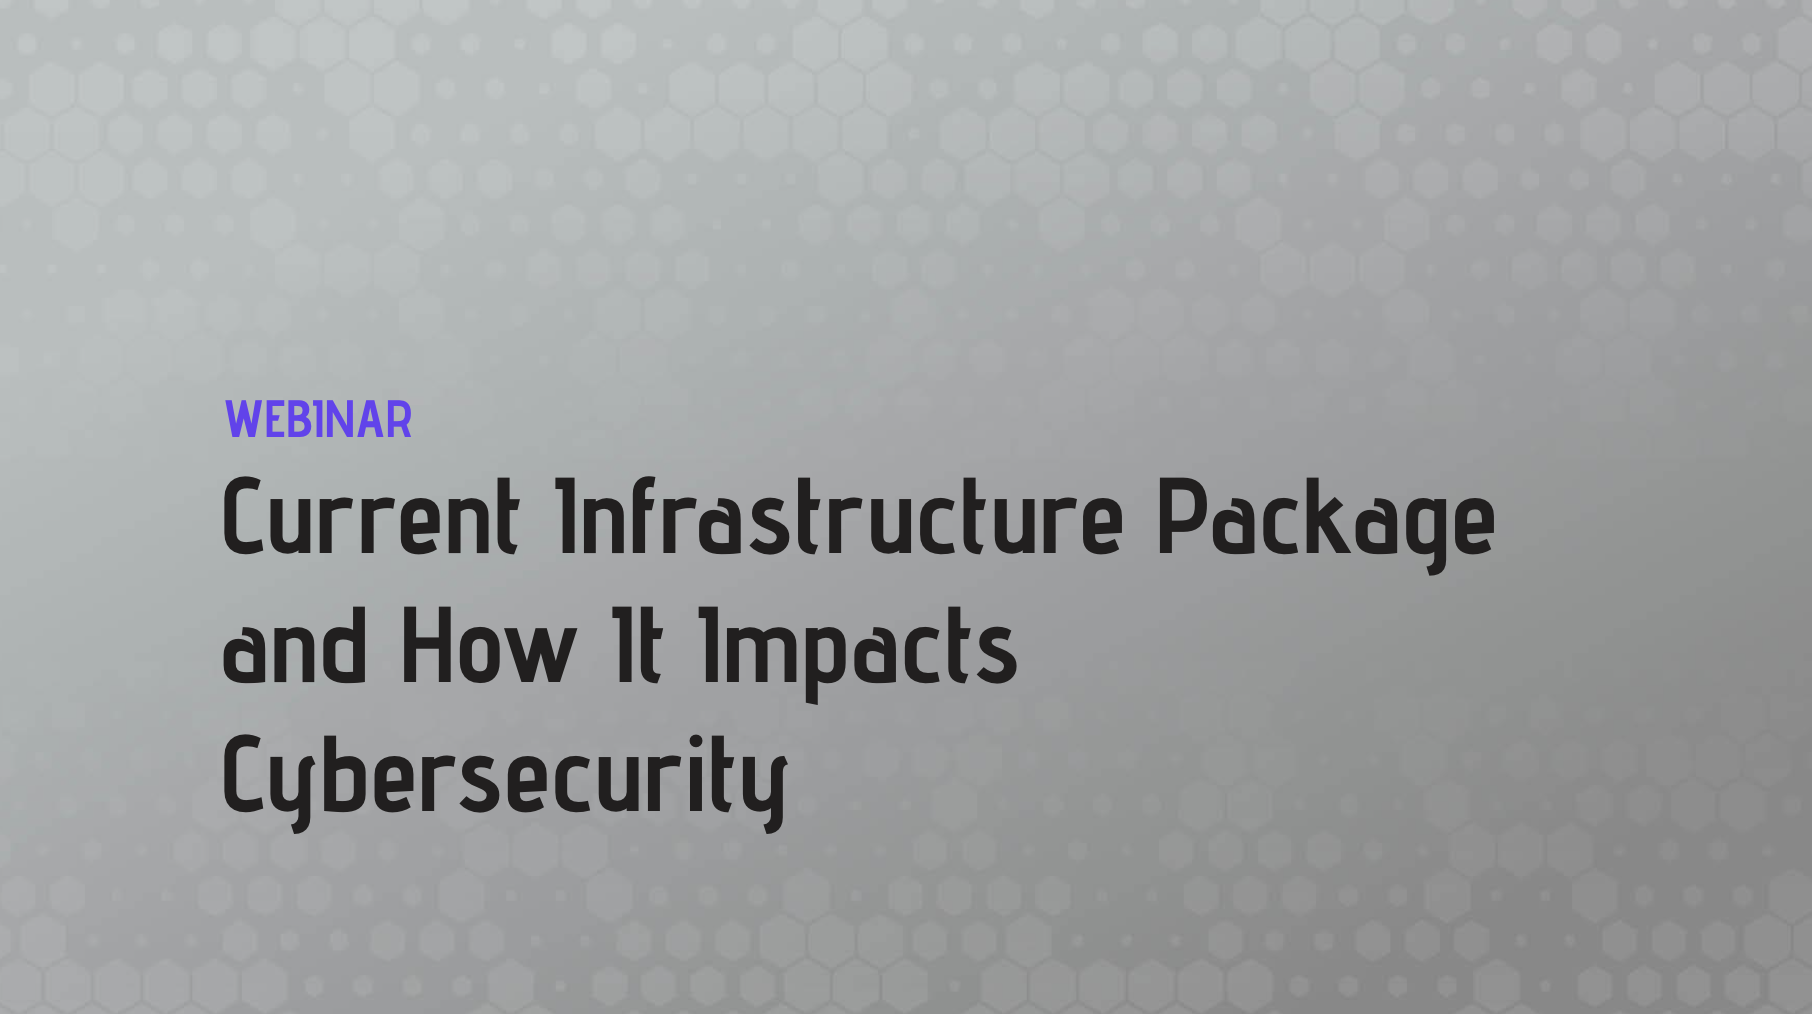 Current Infrastructure Package and How It Impacts Cybersecurity